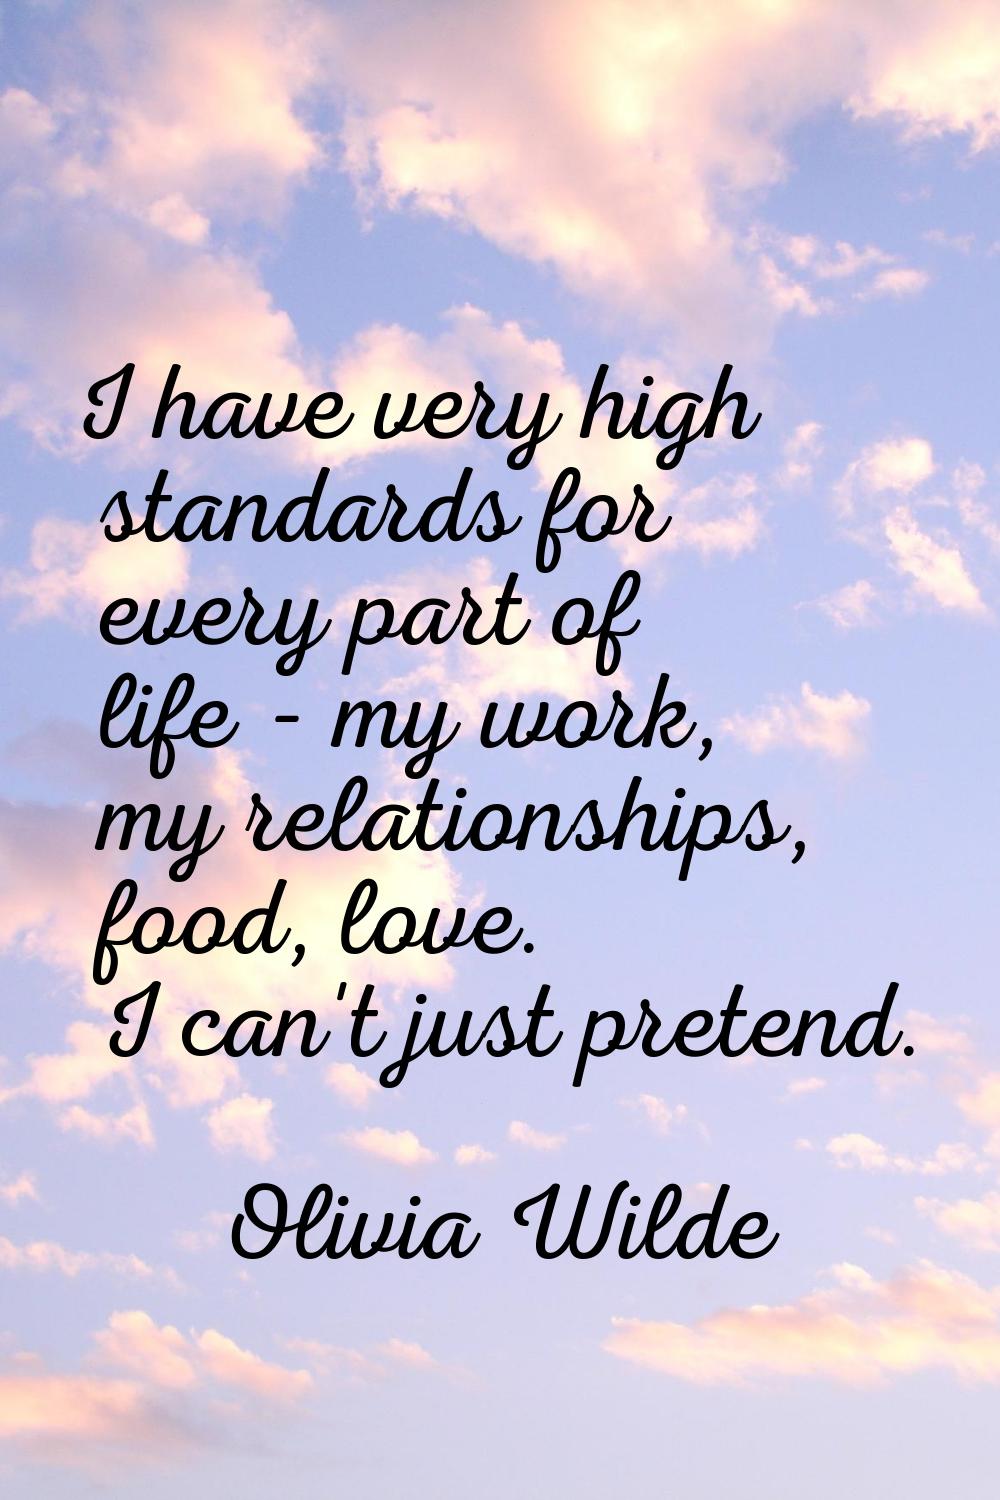 I have very high standards for every part of life - my work, my relationships, food, love. I can't 